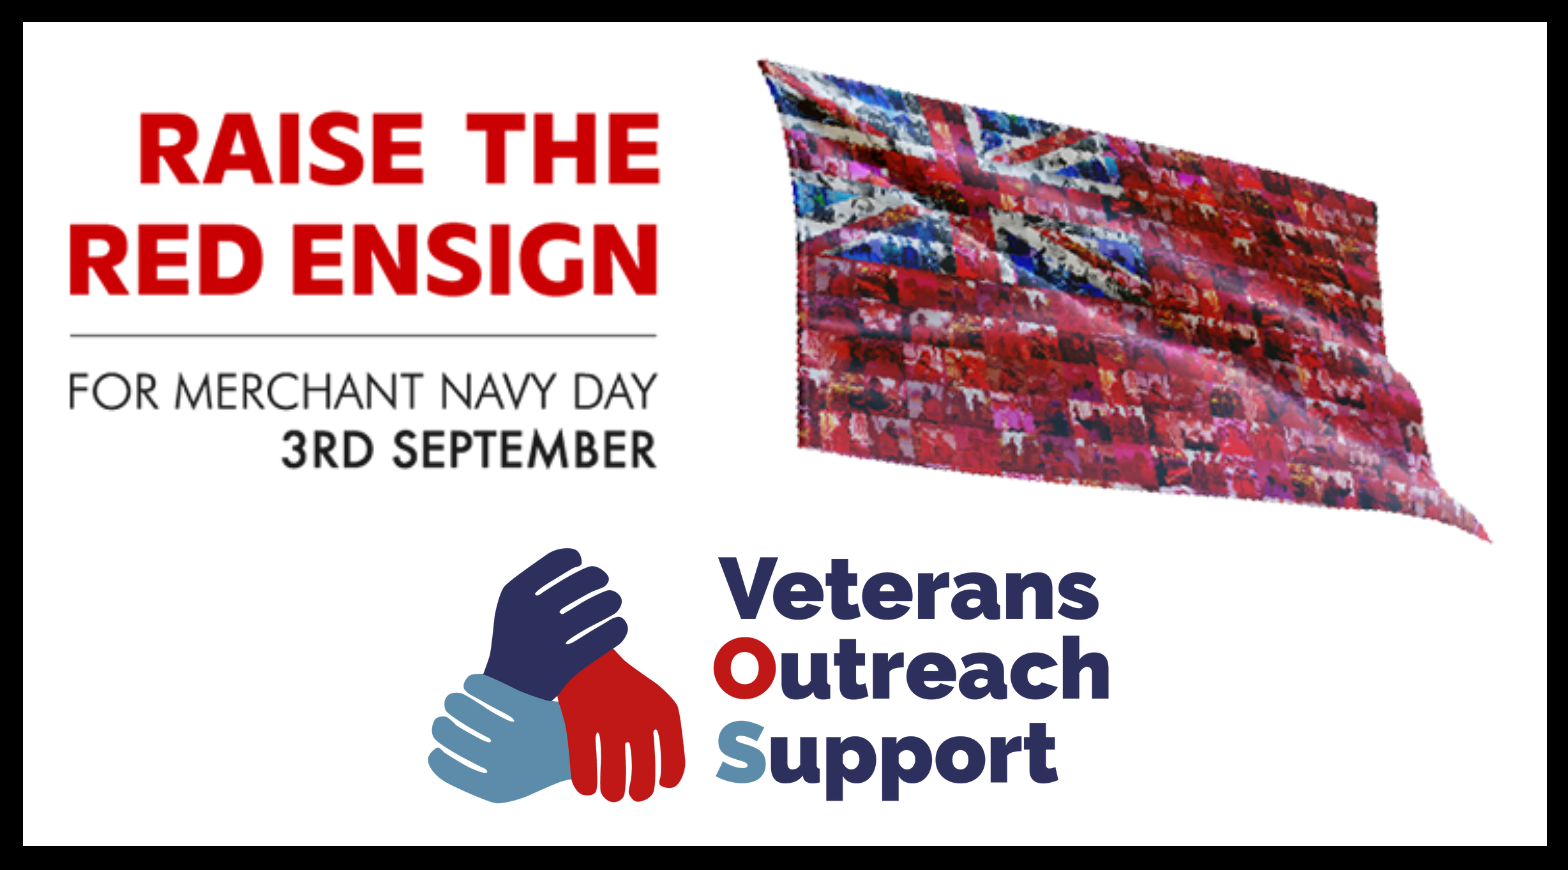 Merchant Navy Day with Veterans Outreach Support and 'Fly the Red Ensign'